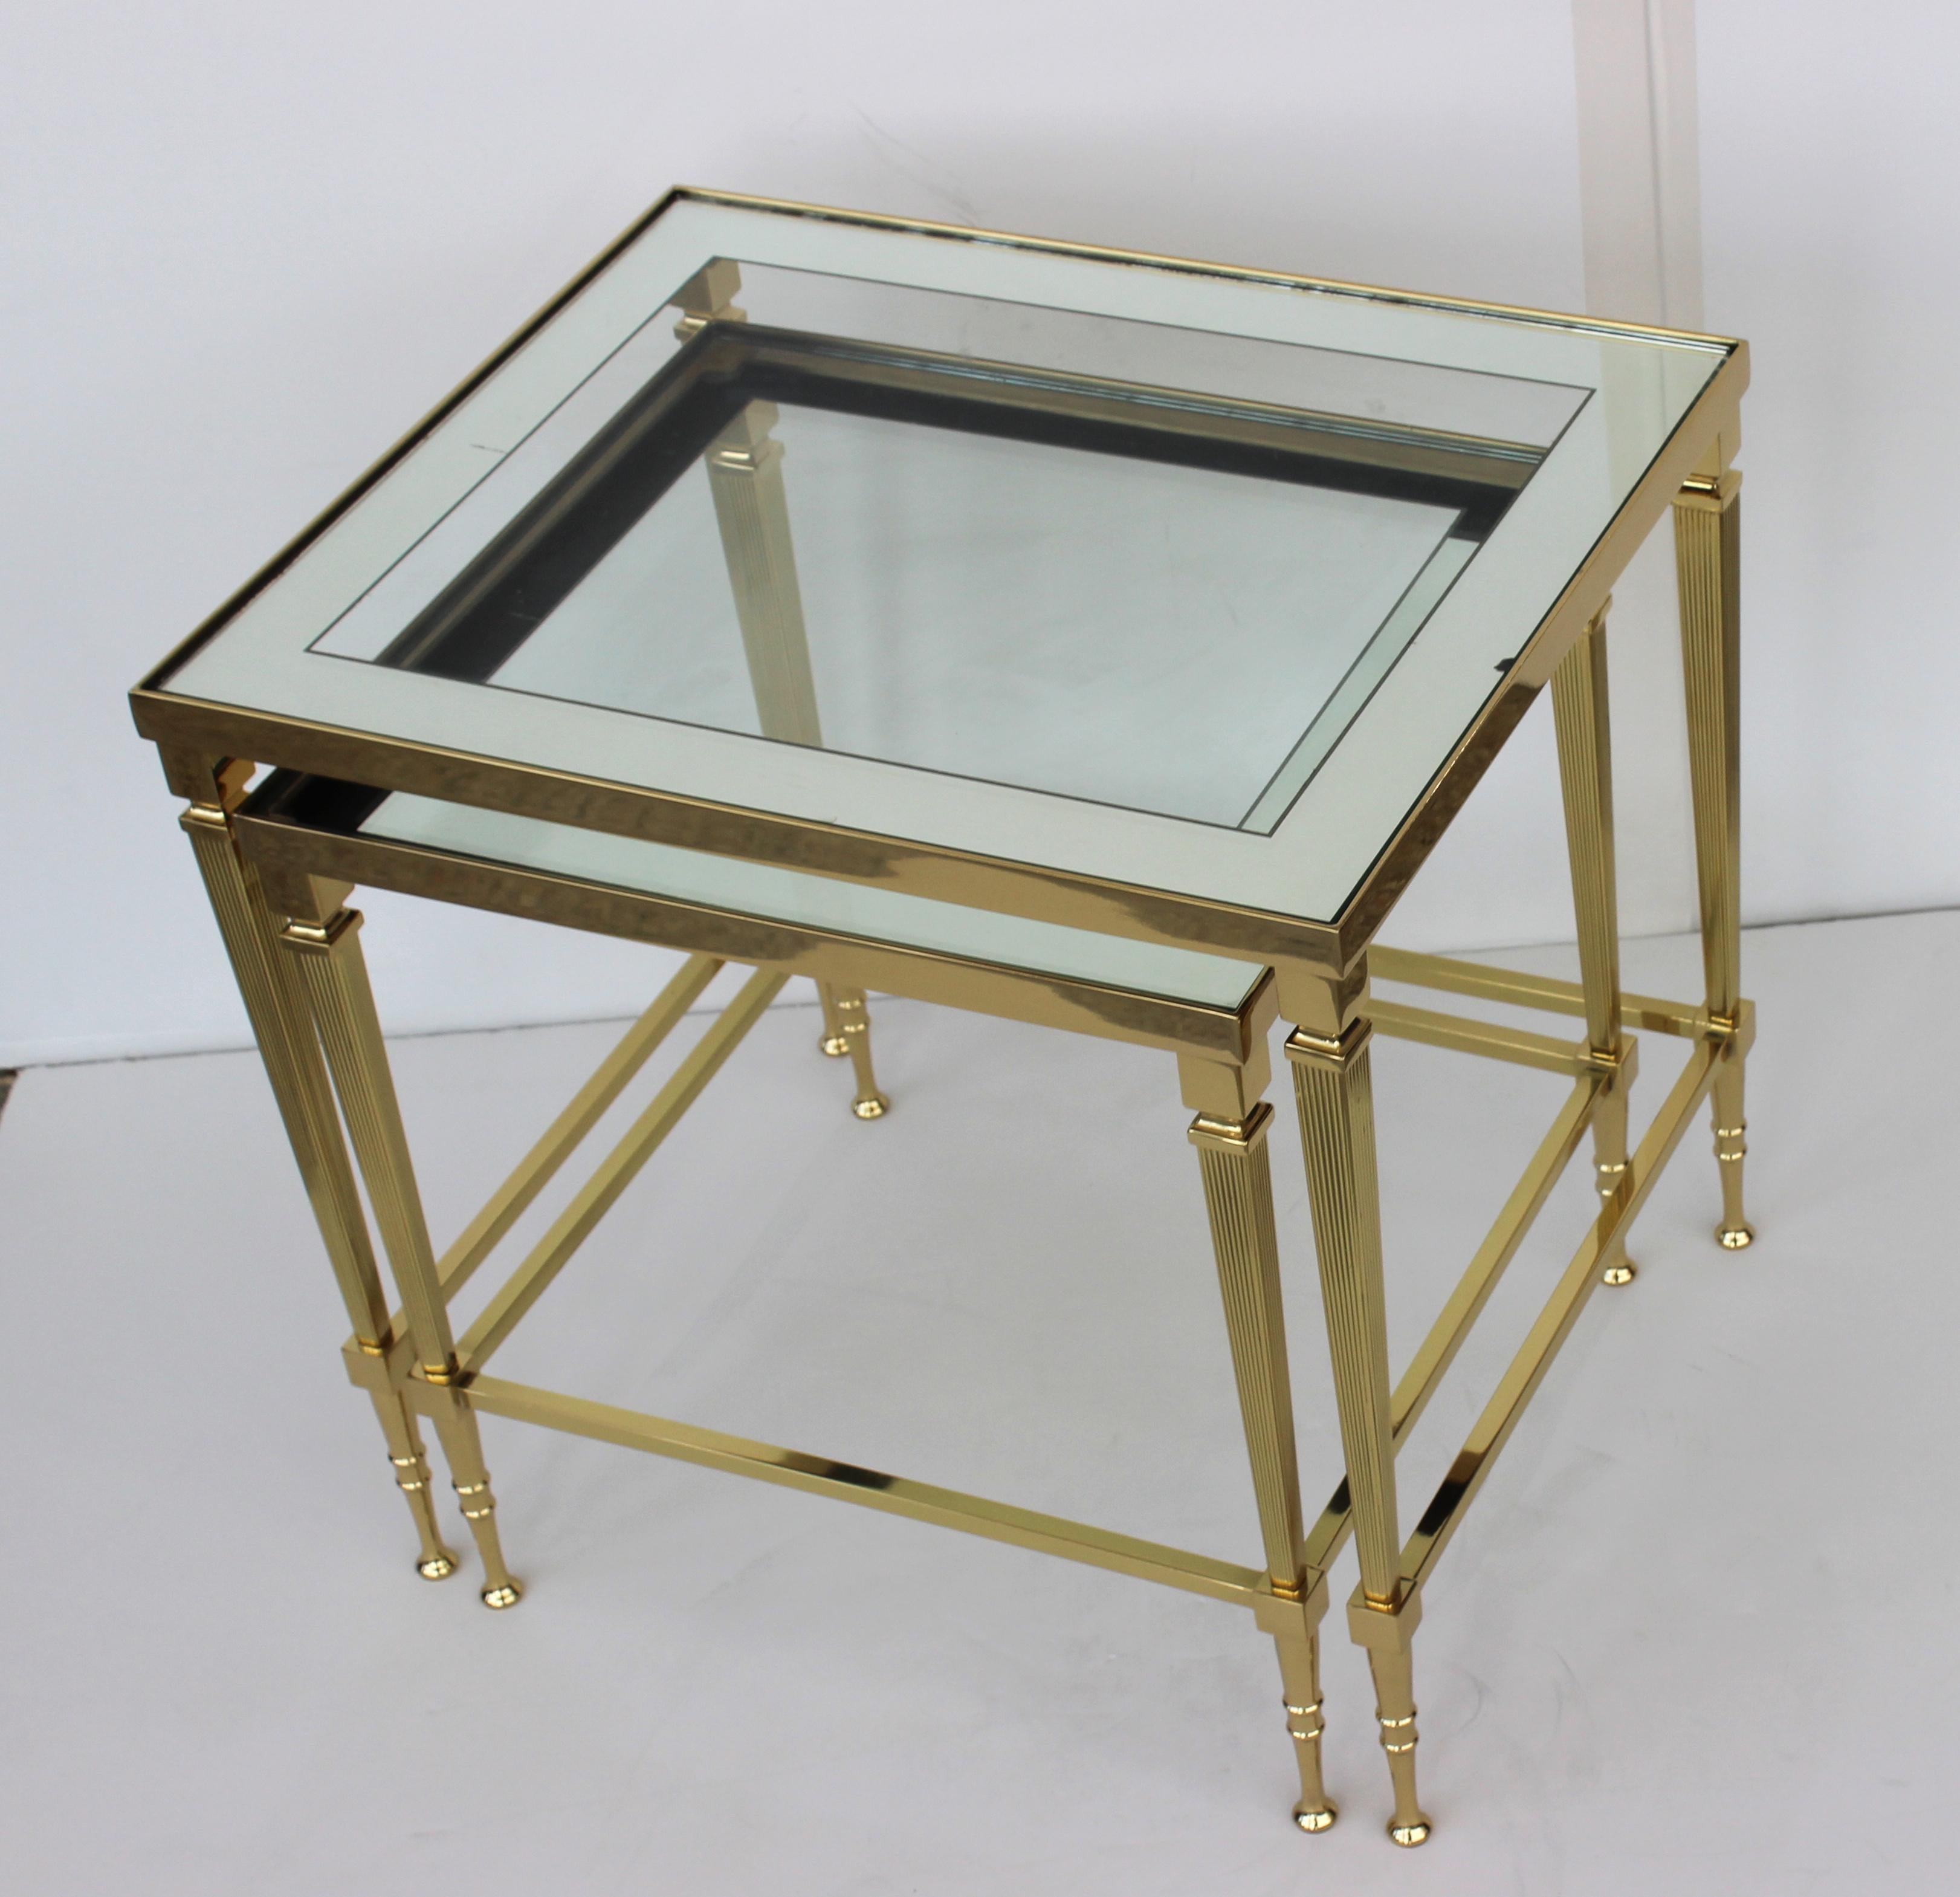 This stylish and chic set of polished brass nexting tables are attributed to Maison Jansen. The frames have been professionally polished and finished with a clear coat lacquer (no tarnishing), and they retain their original glass with mirror border